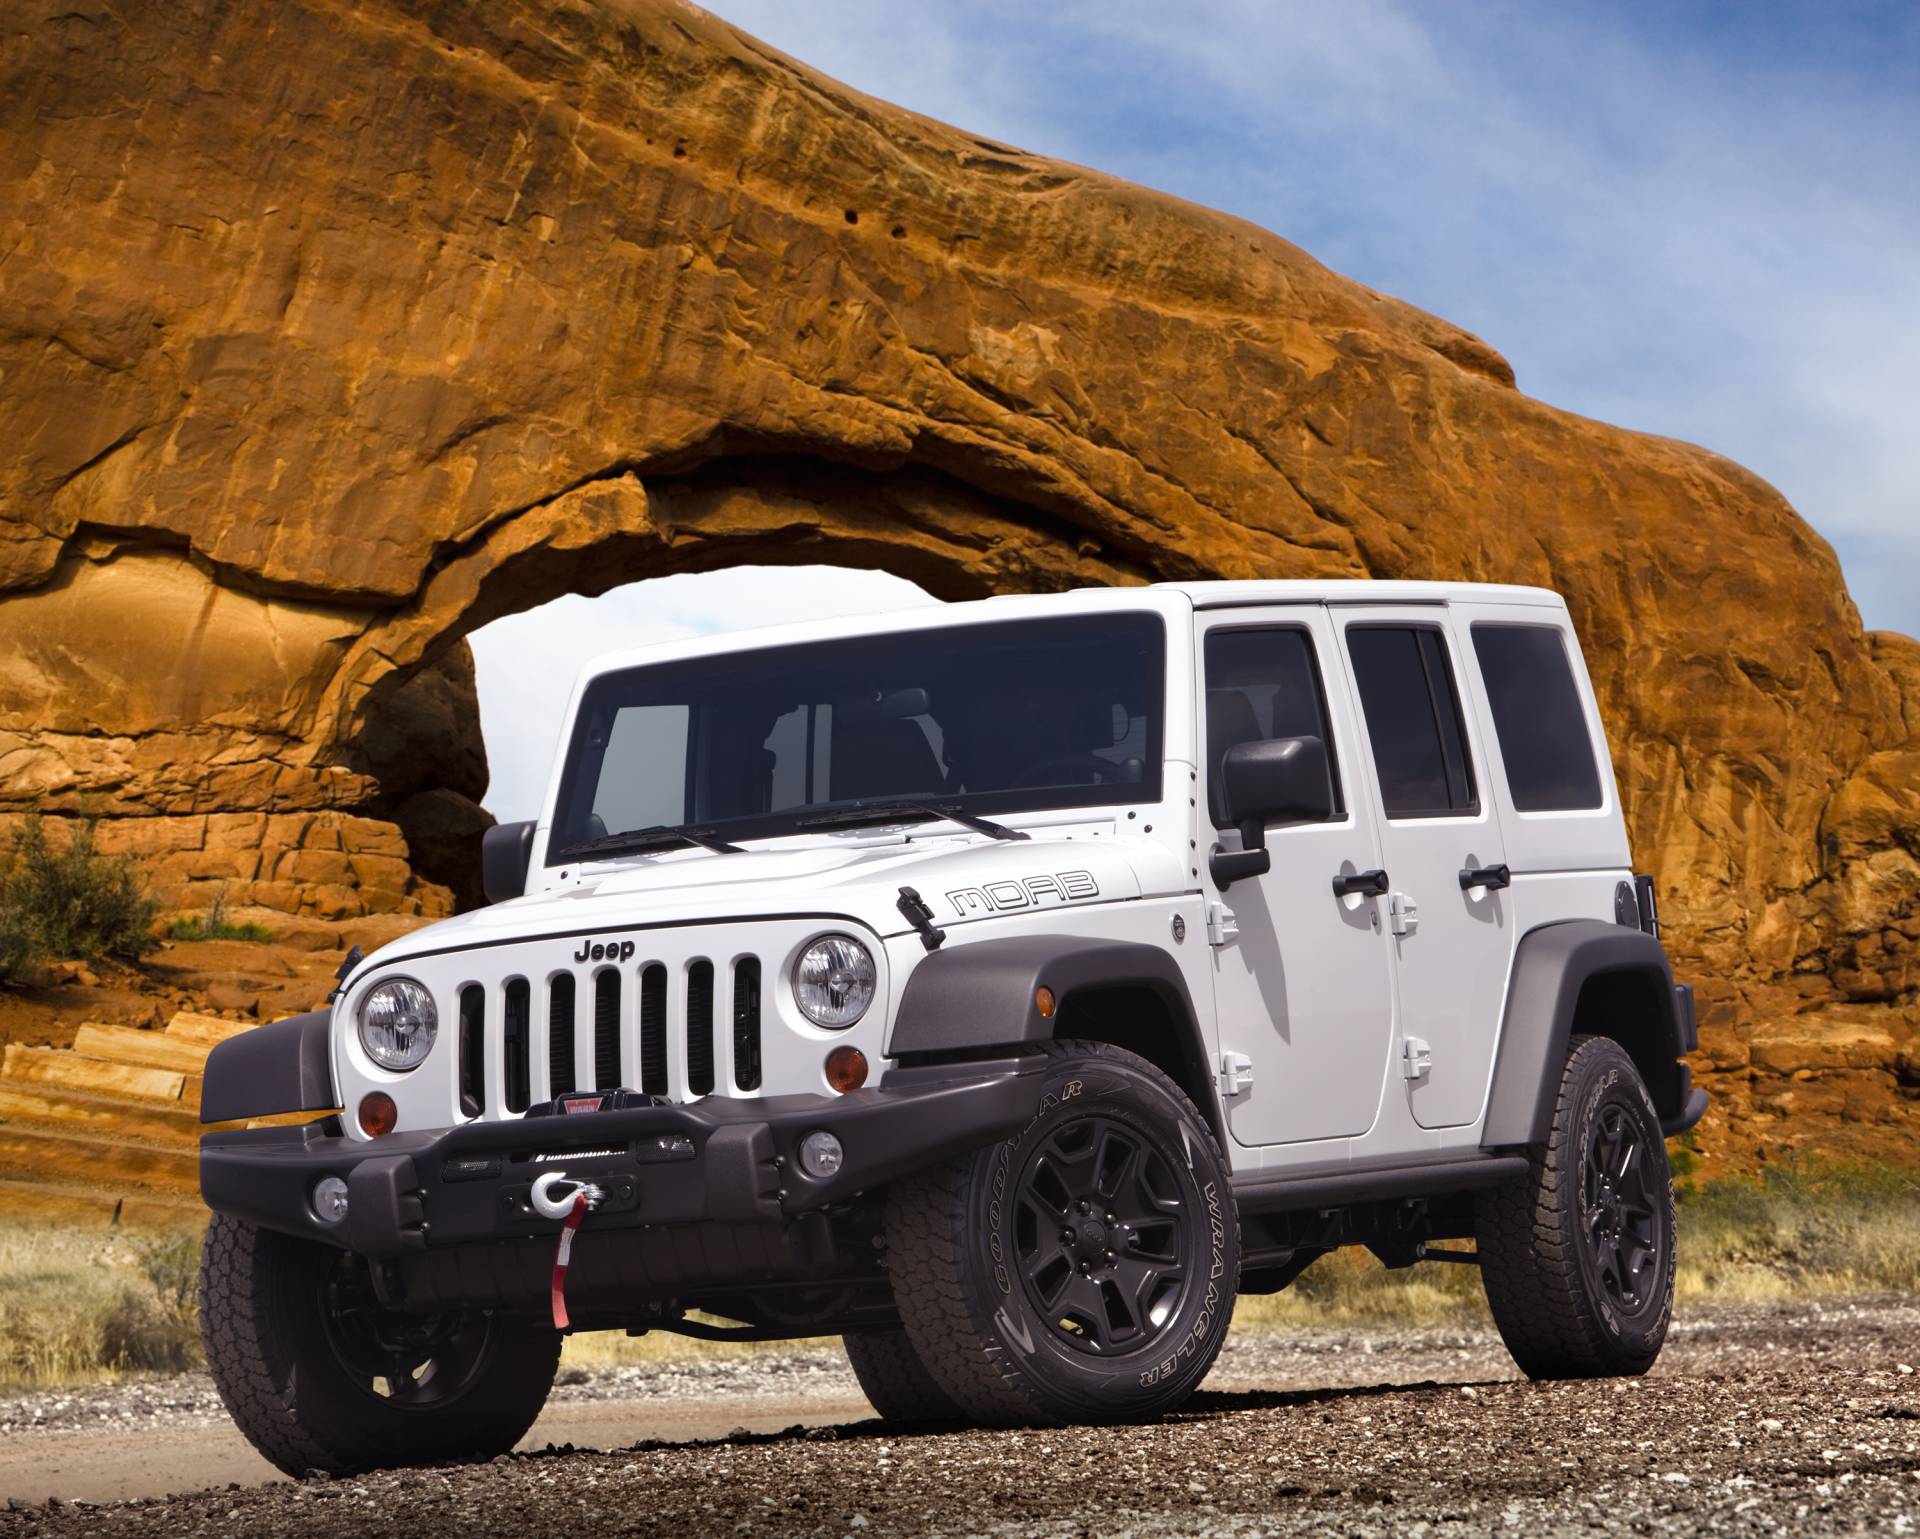 2013 Jeep Wrangler Moab News and Information